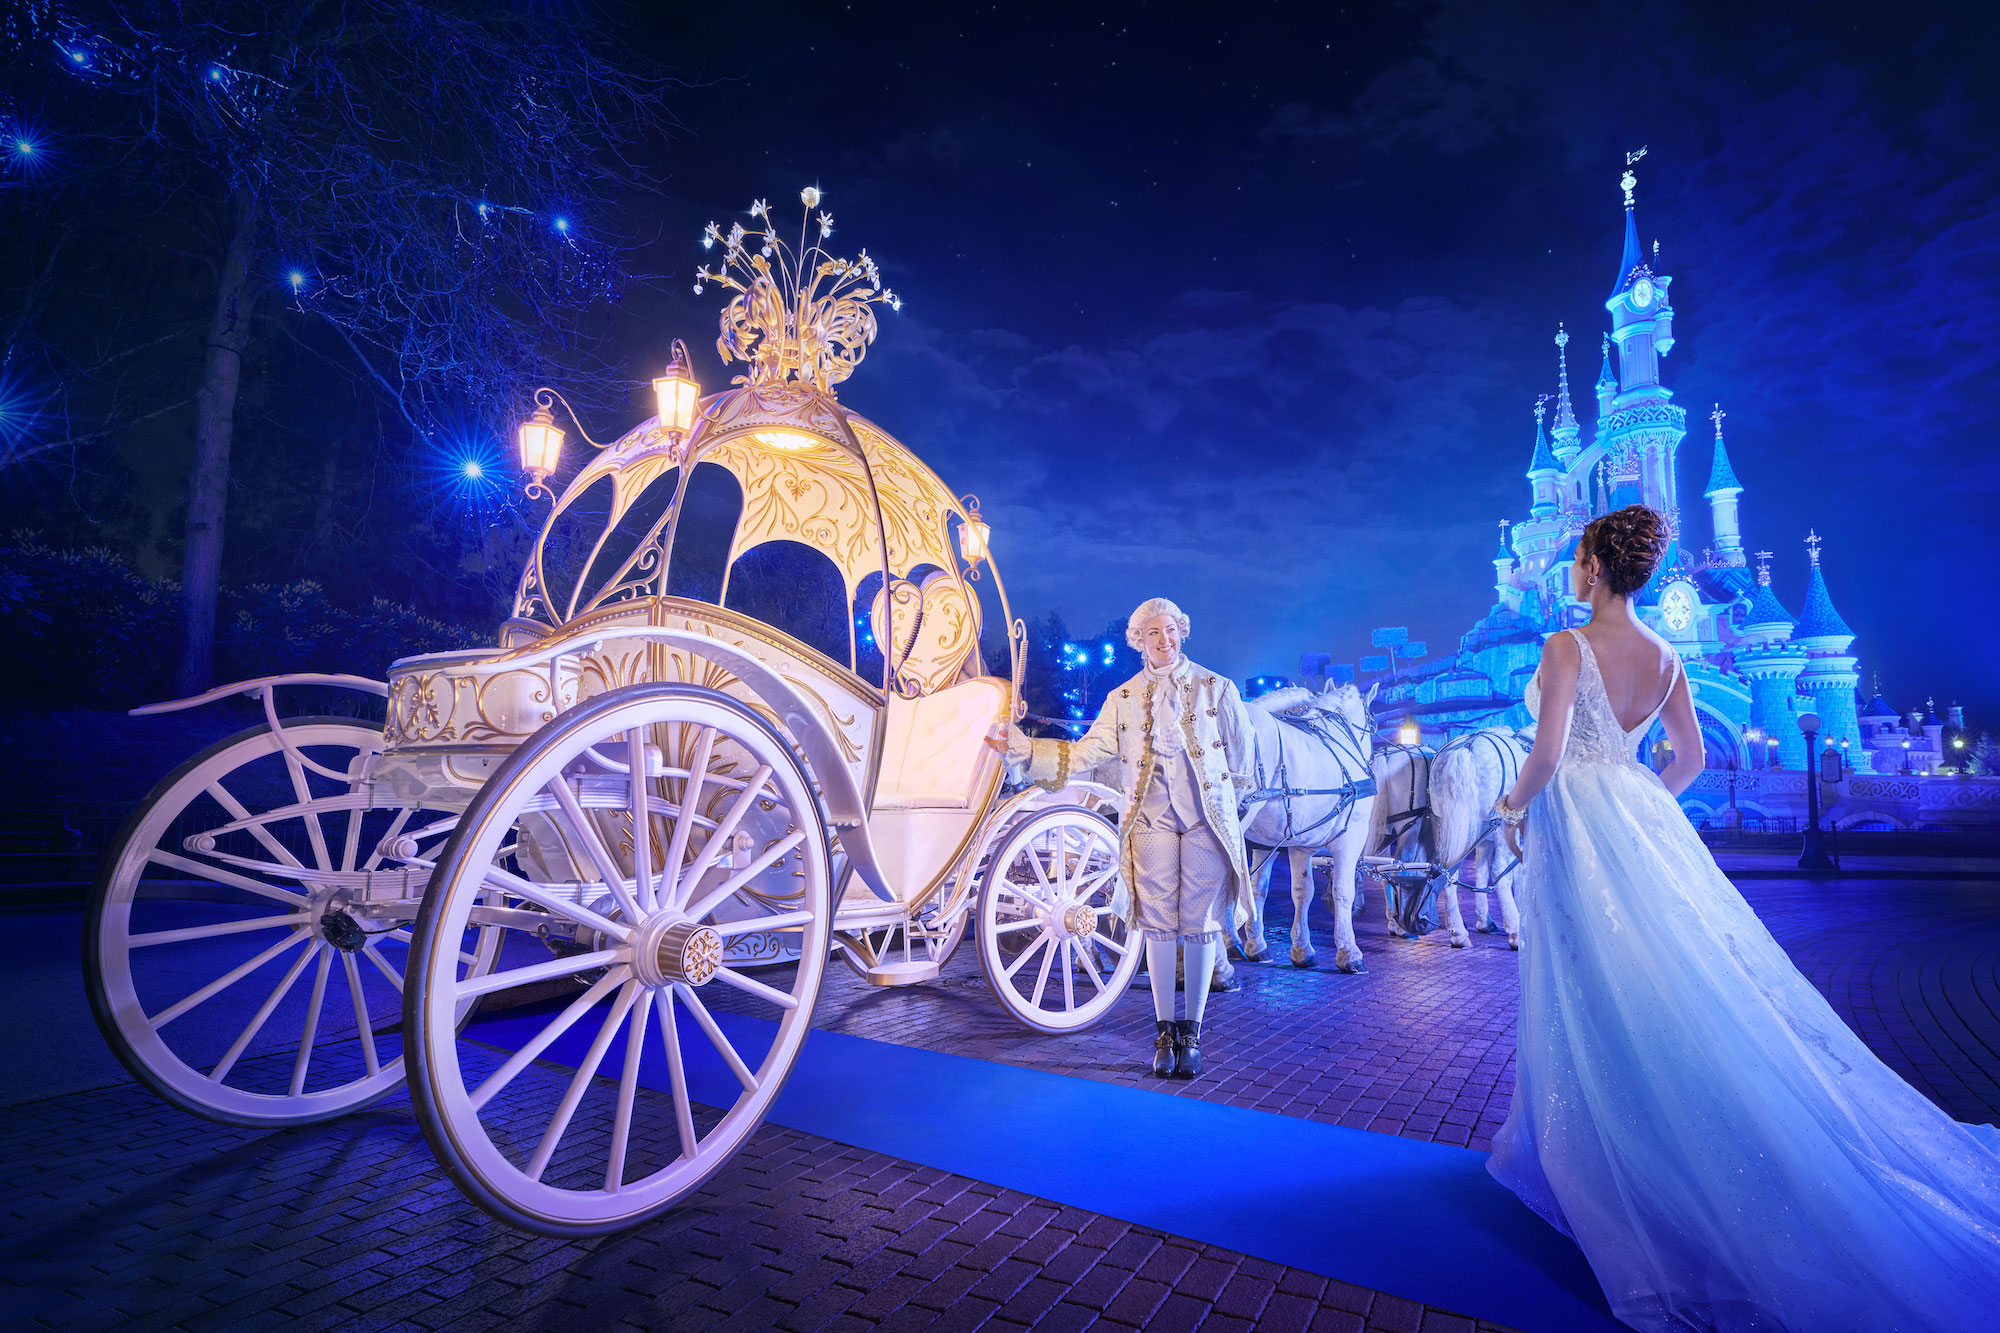 Disneyland®Paris Now Offers an Enchanted Carriage for Weddings in the World’s Most Romantic City